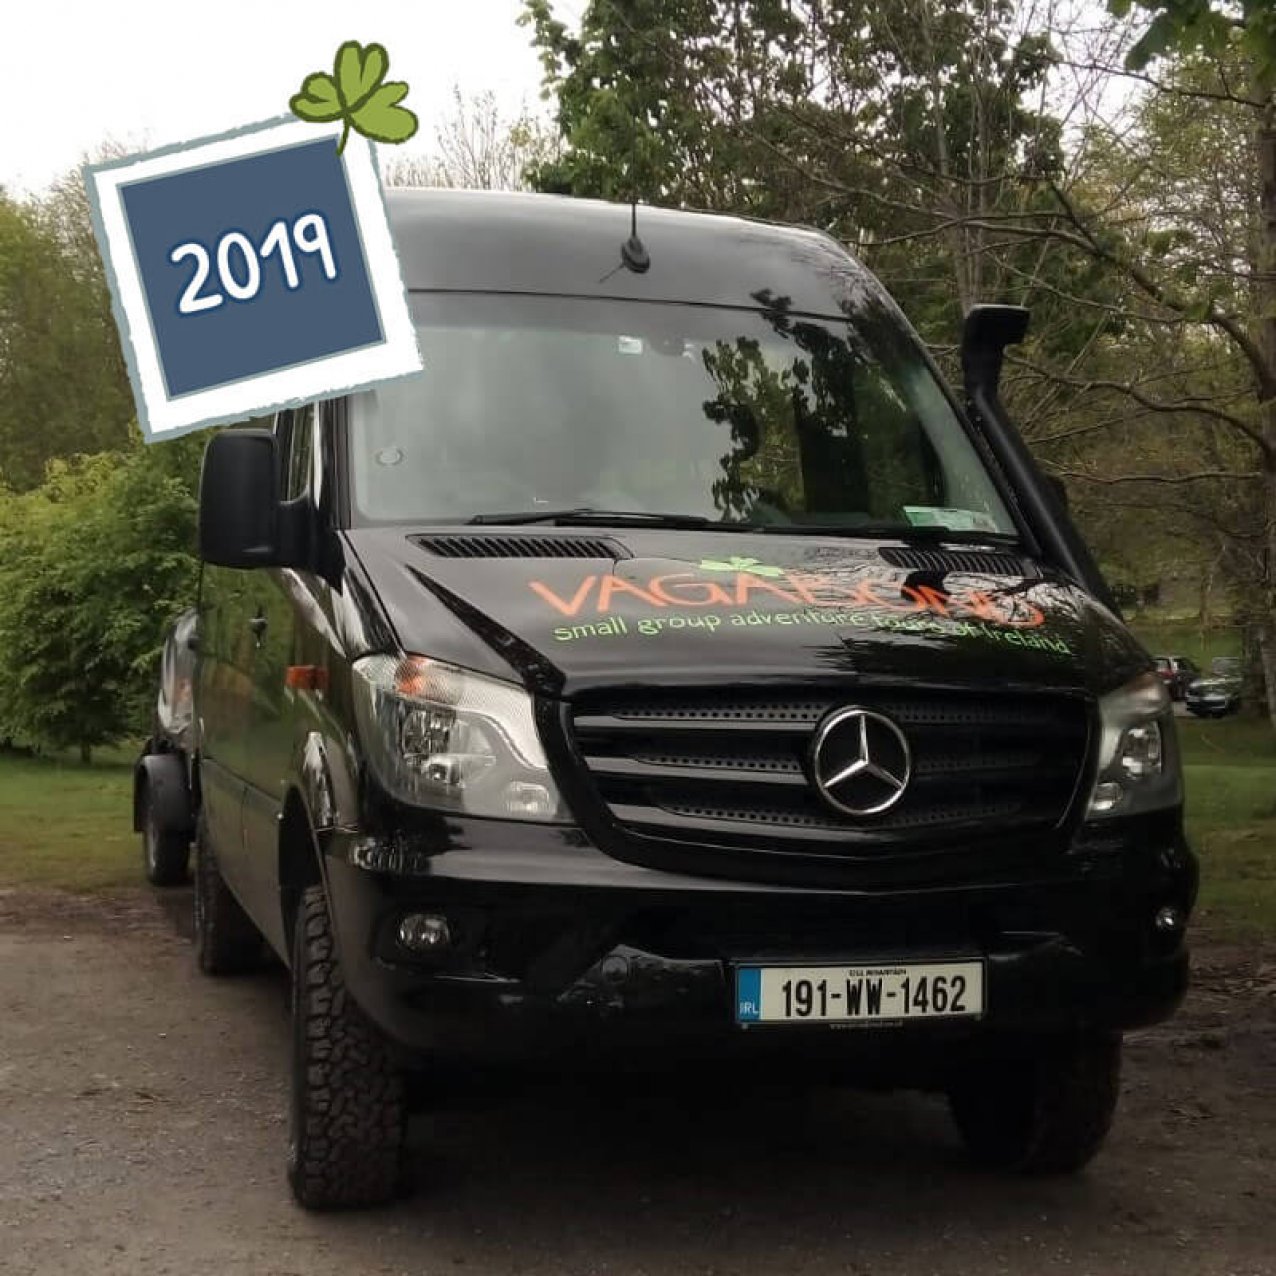 Front view of a 2019 Mercedes VagaTron 4x4 tour vehicle with 2019 date graphic in the upper left corner